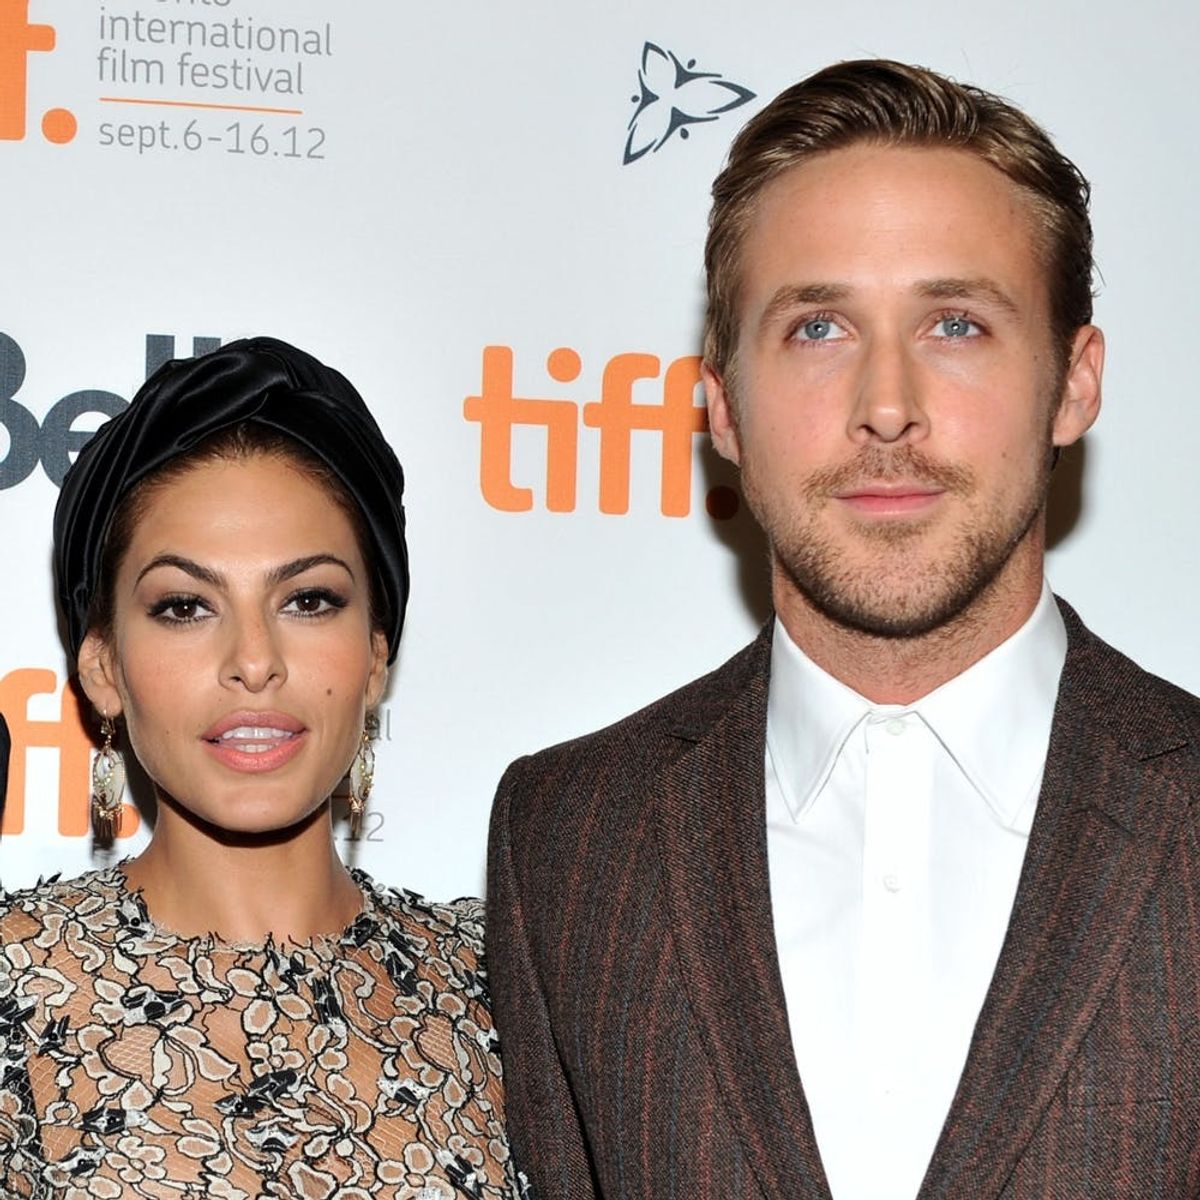 Eva Mendes’ Response to Ryan Gosling’s Speech Was So Subtle You Probably Missed It